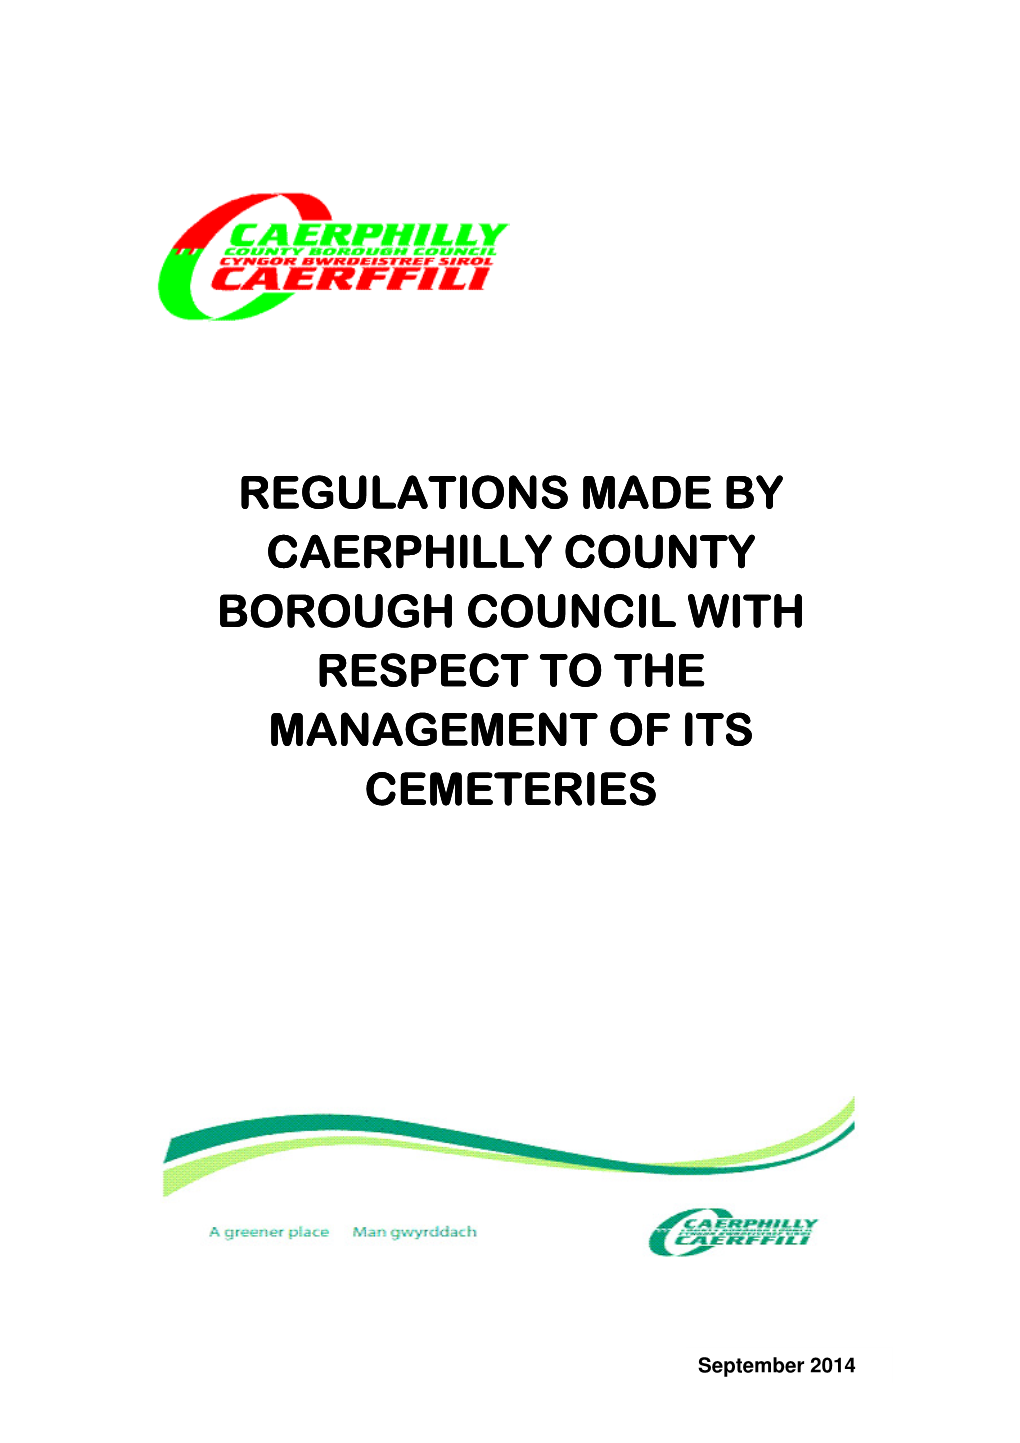 Regulations Made by Caerphilly County Borough Council with Respect to the Management of Its Cemeteries